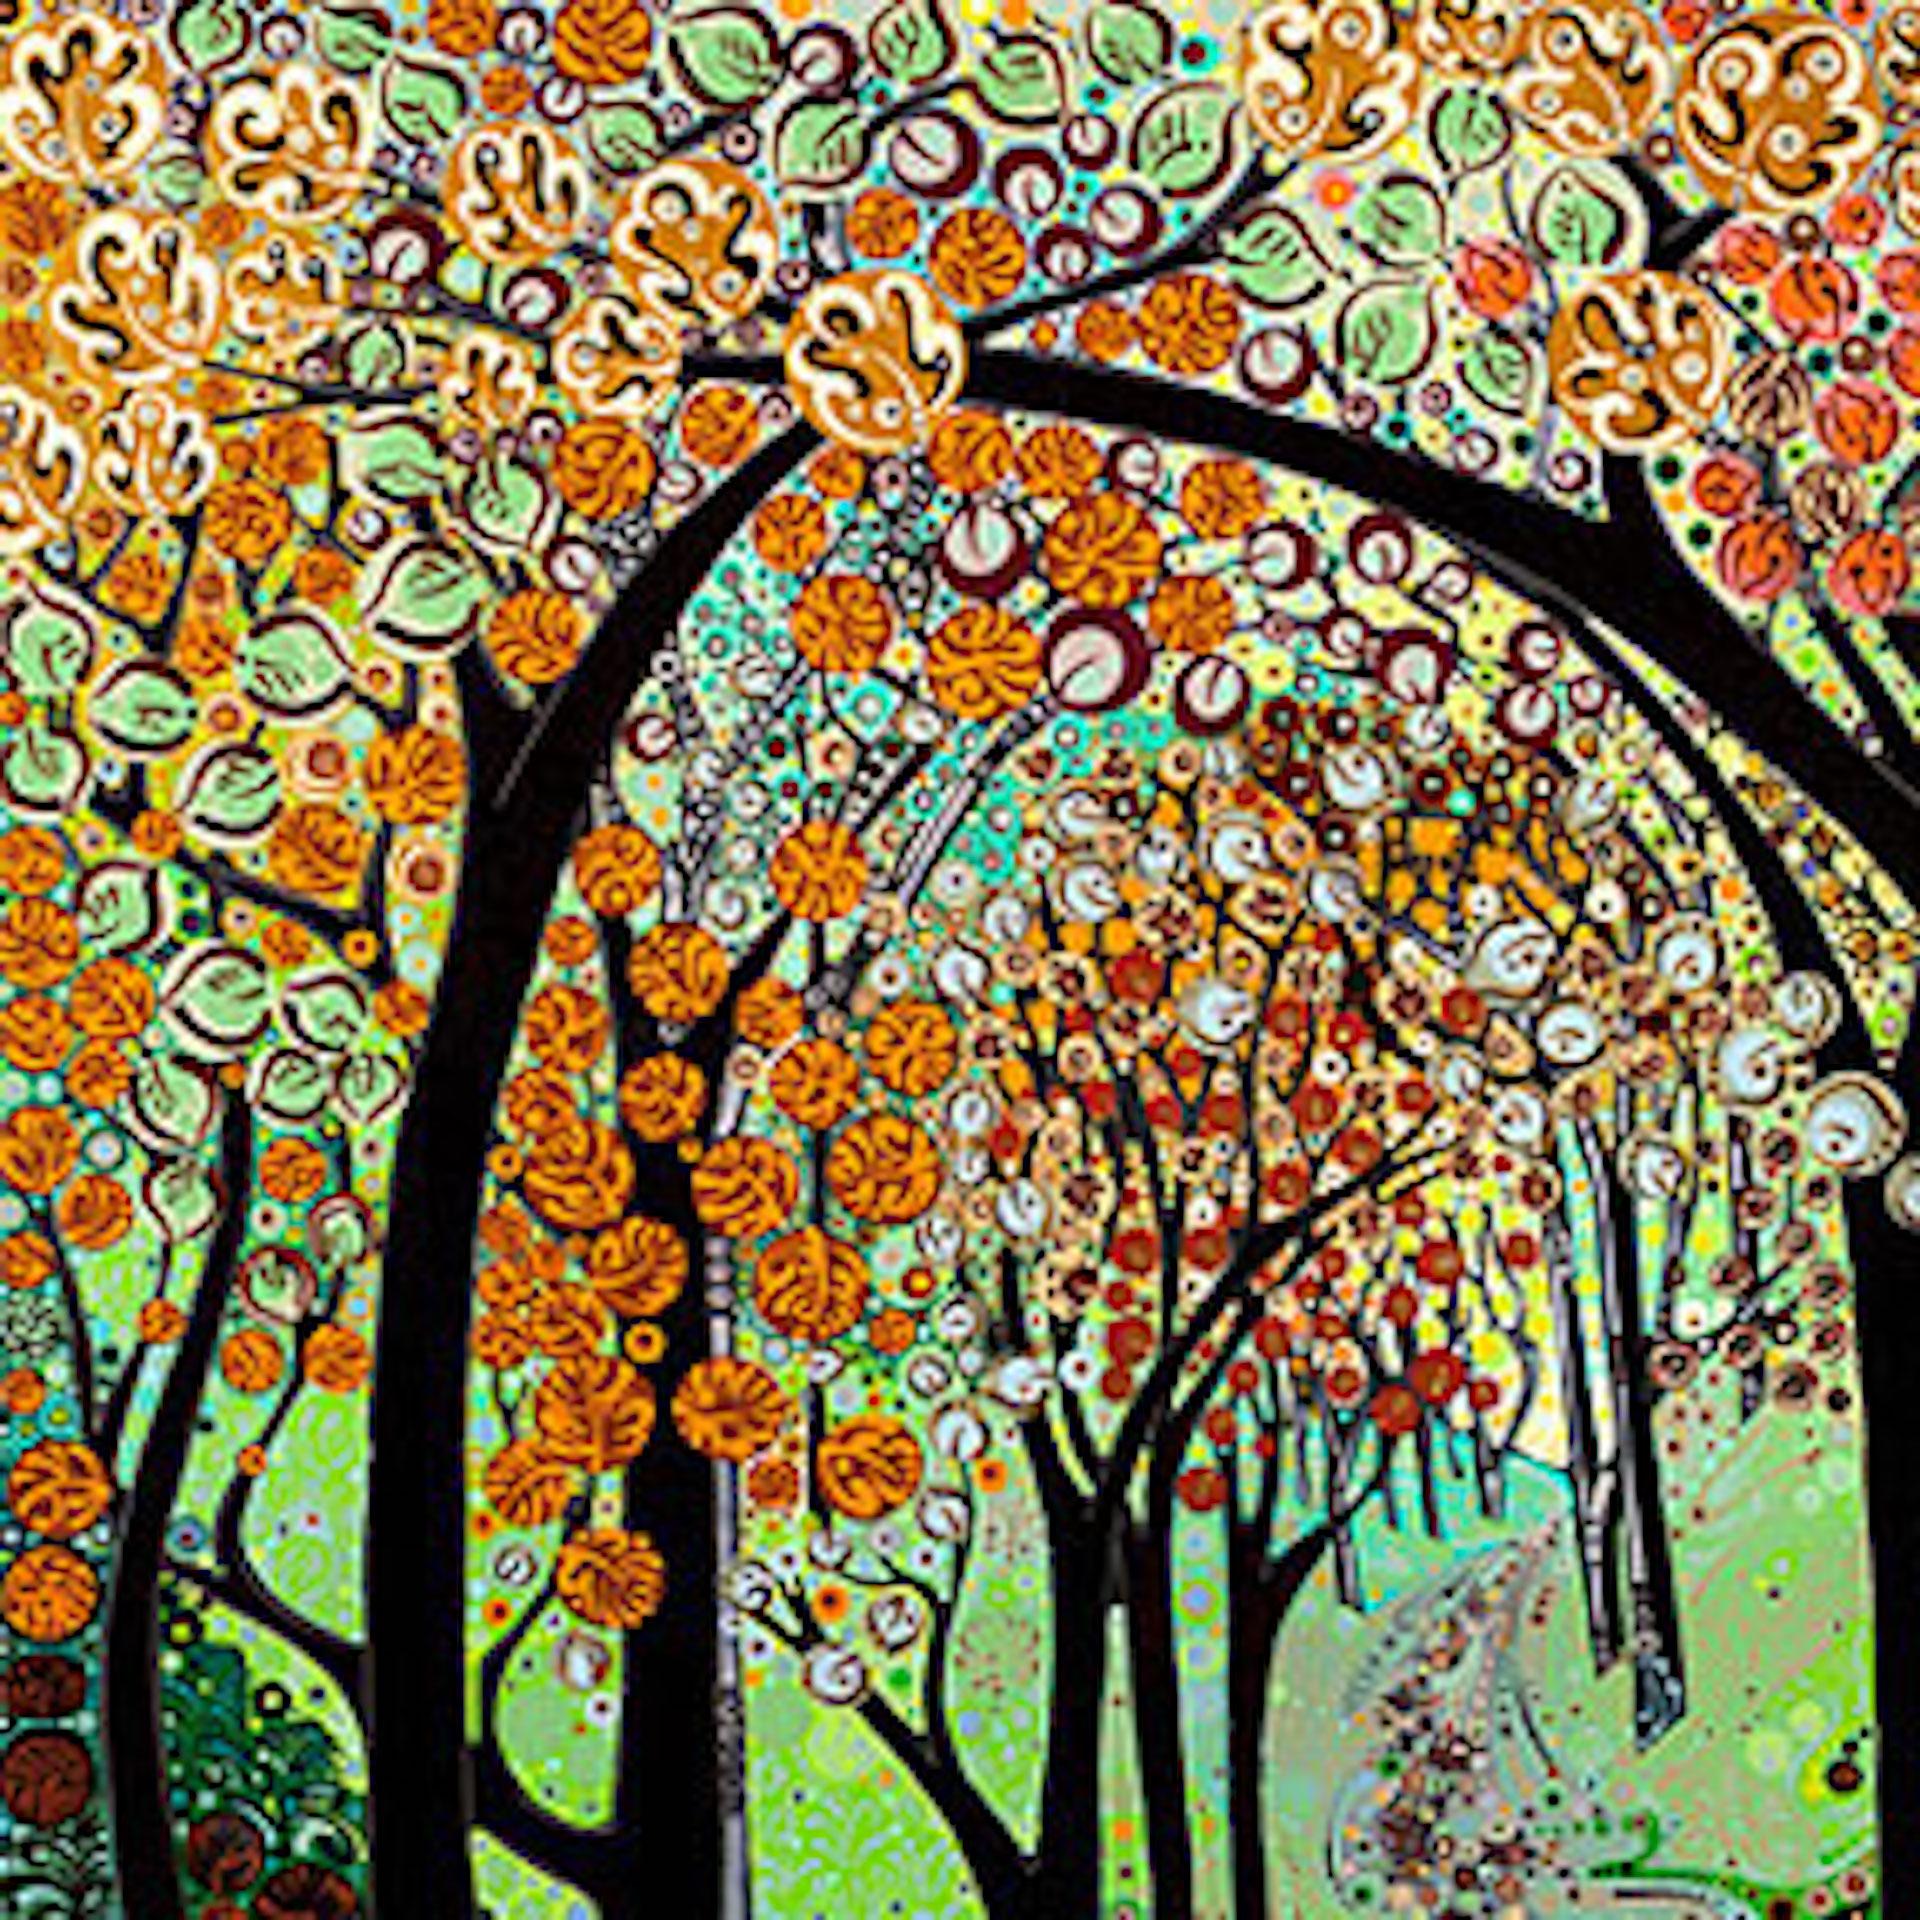 Katie Allen
Autumn Tree Tunnel
Limited edition giclee print
Edition of 50
Size – Dependent on Order – Please See Below

This work is available in new sizes 40×40 cm- £290
60 x 60 cm —£320
80 x 80 cm- £350
100×100 cm -£380

Sold Unframed
Please Note